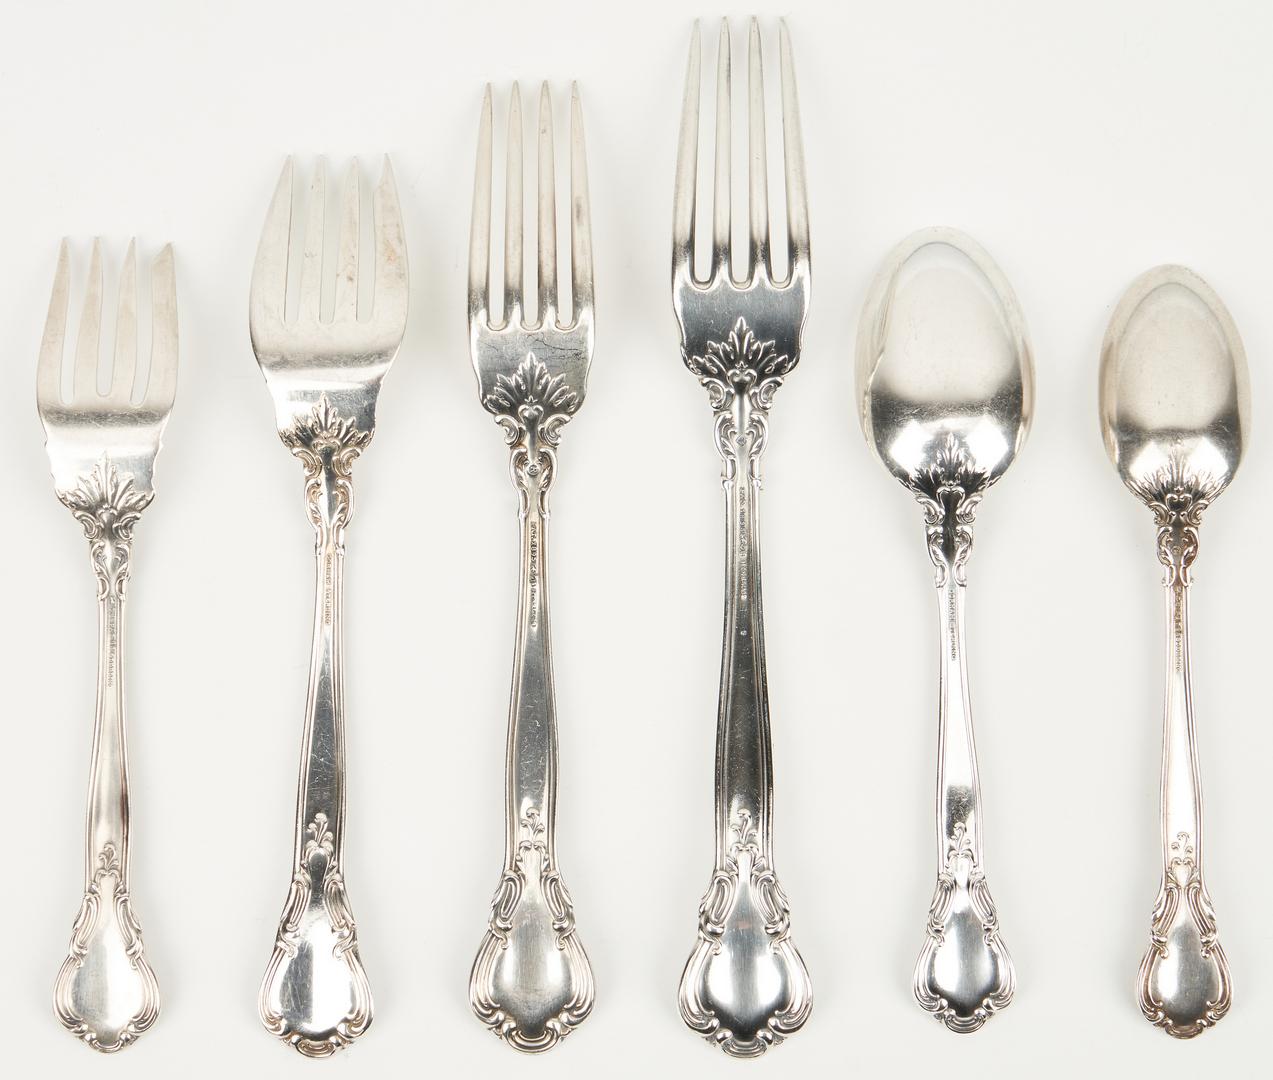 153 Pcs. Gorham Chantilly Sterling Silver Flatware - Image 4 of 14